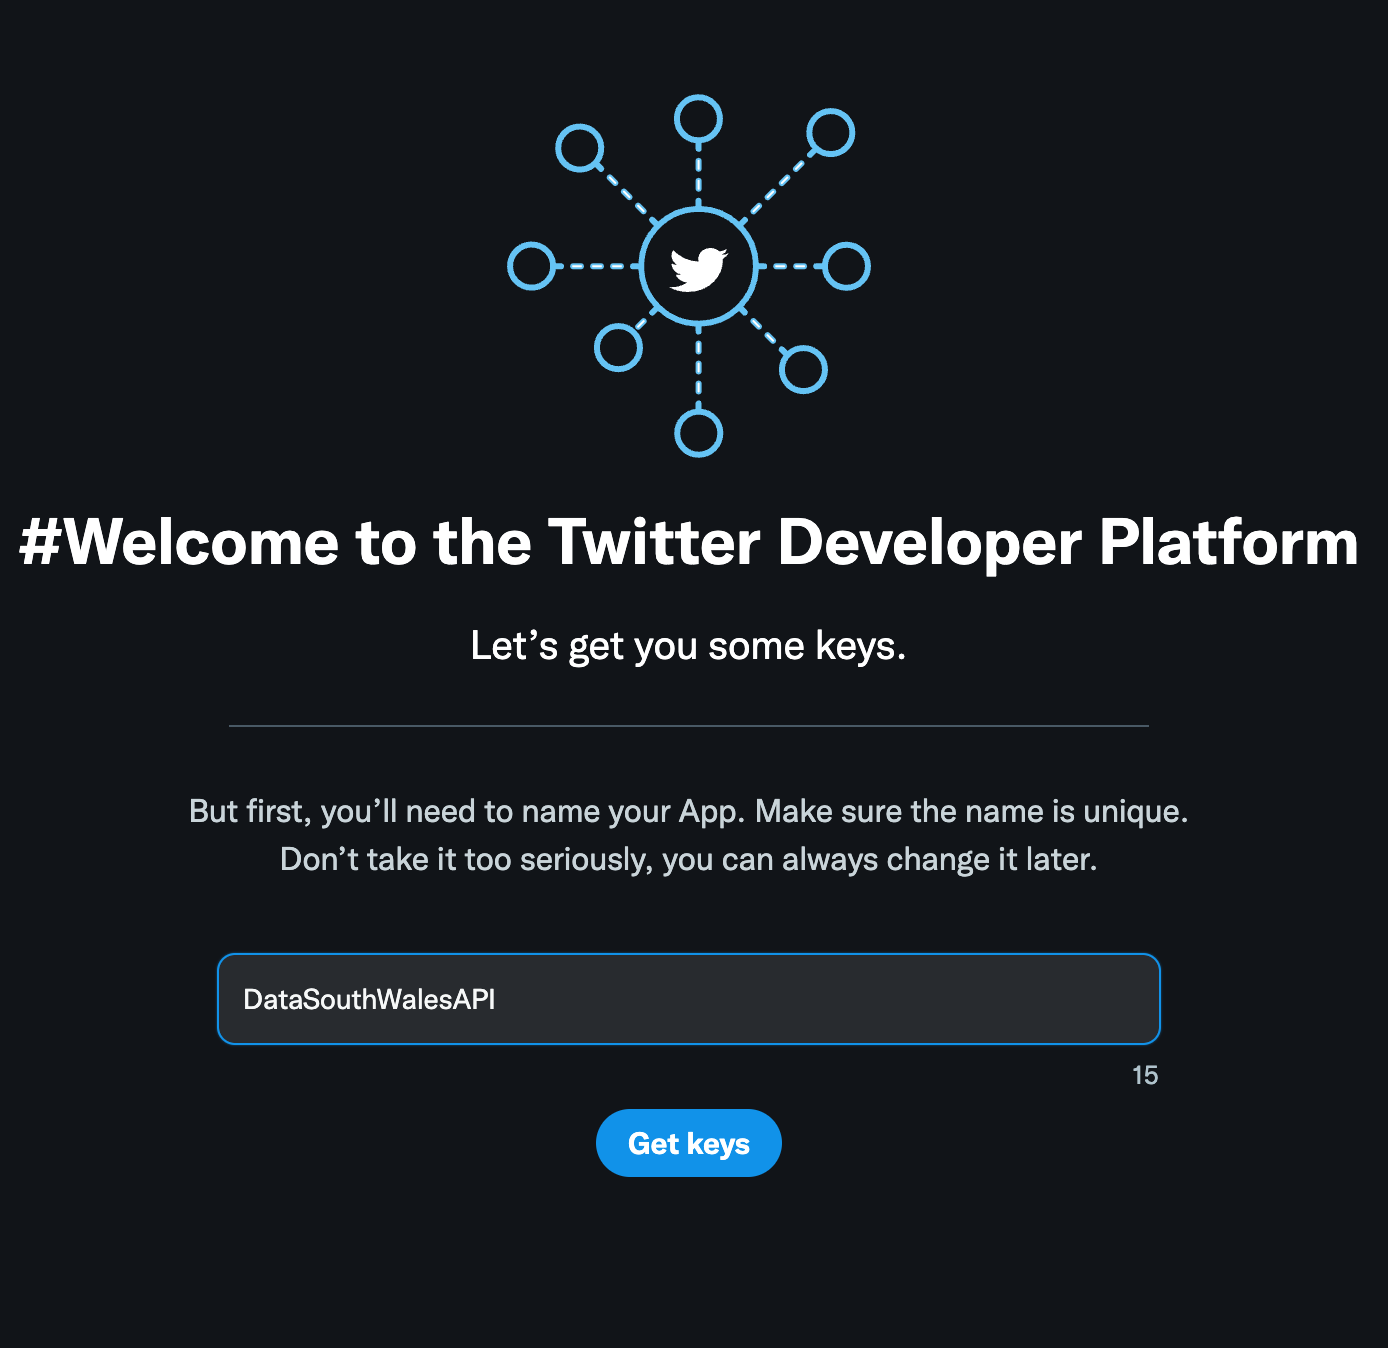 image says Welcome to the Twitter Developer Platform and asks you to enter a name for your project